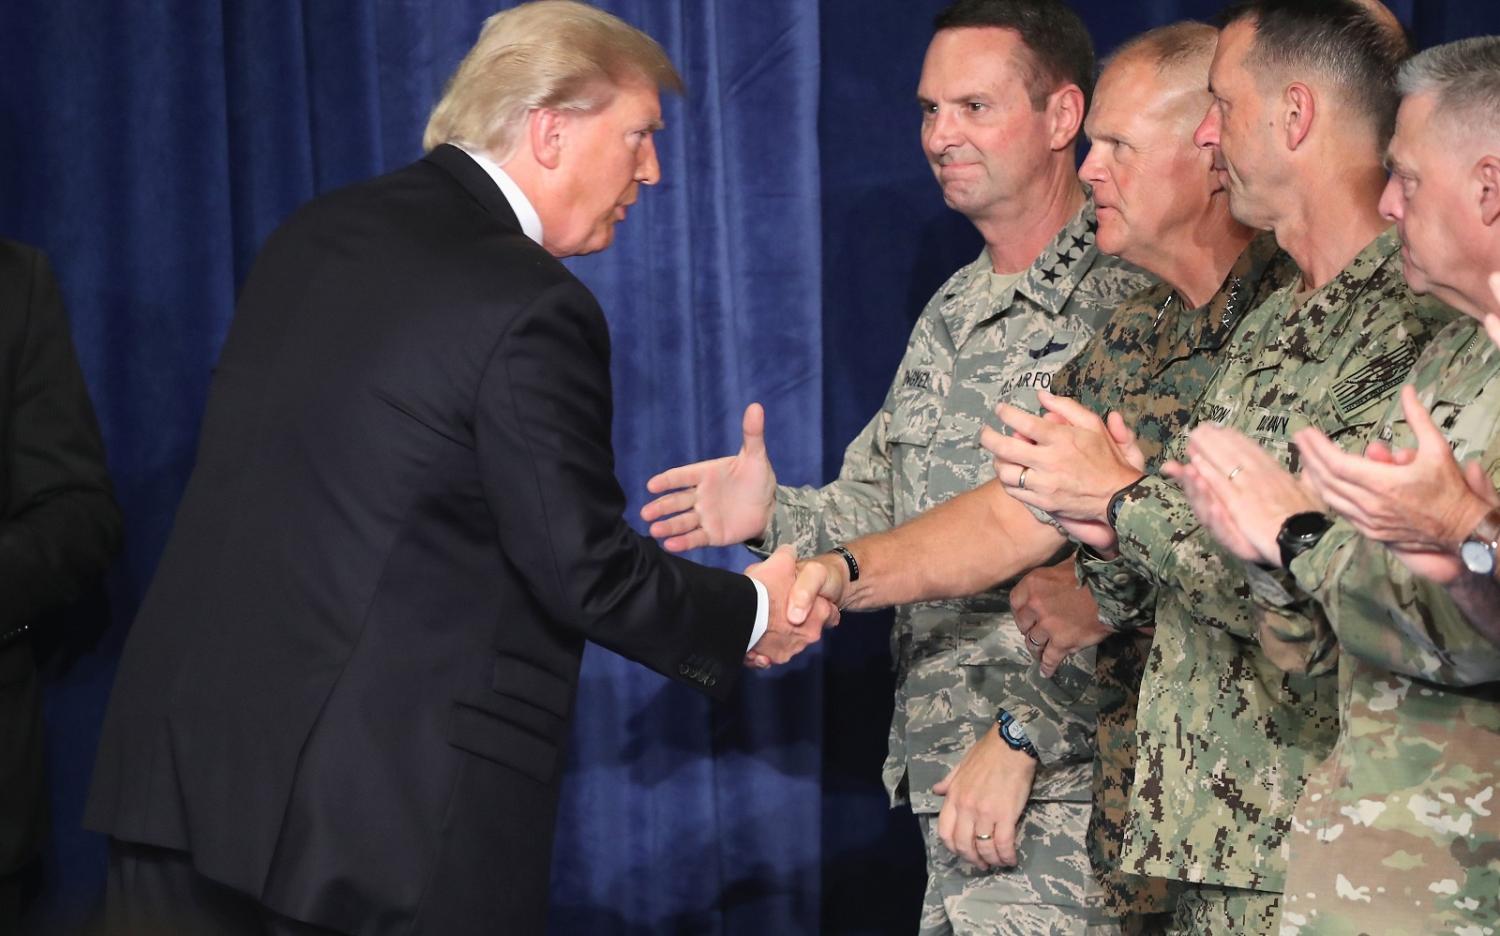 President Donald Trump greets military leaders before his speech on Afghanistan. (Photo by Mark Wilson/Getty Images)